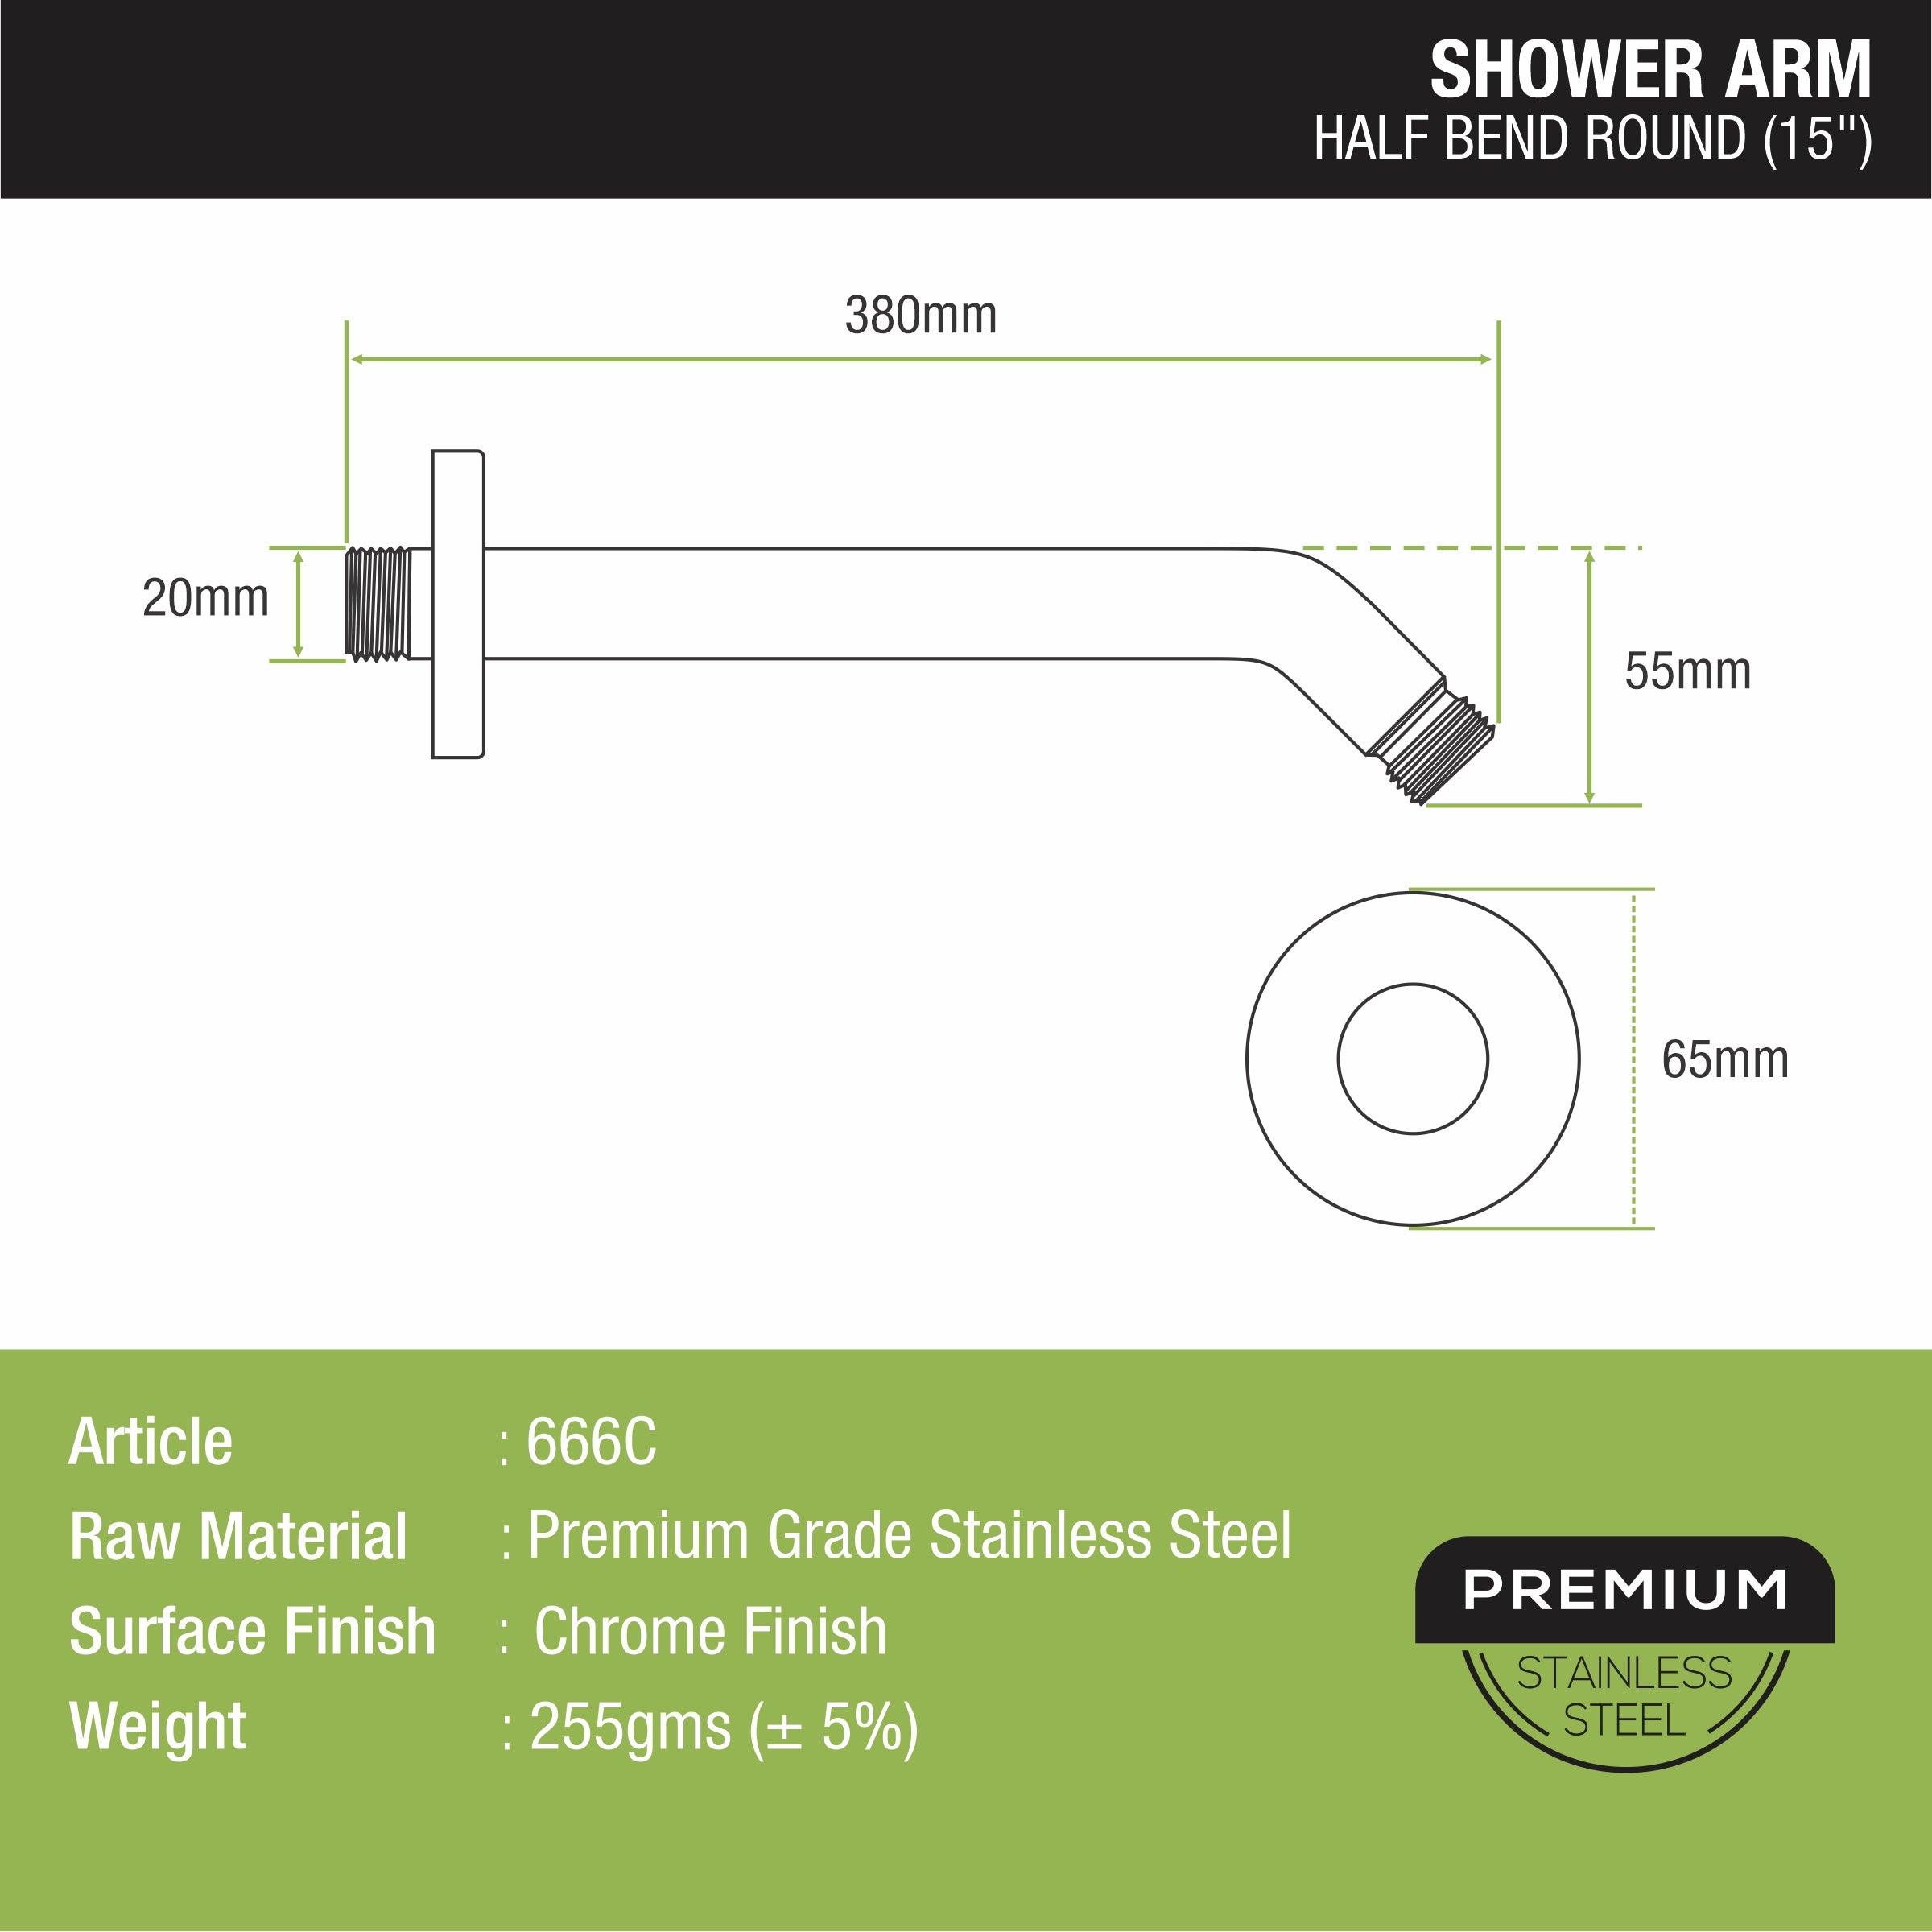 Half Bend Round Shower Arm (15 Inches) sizes and dimensions